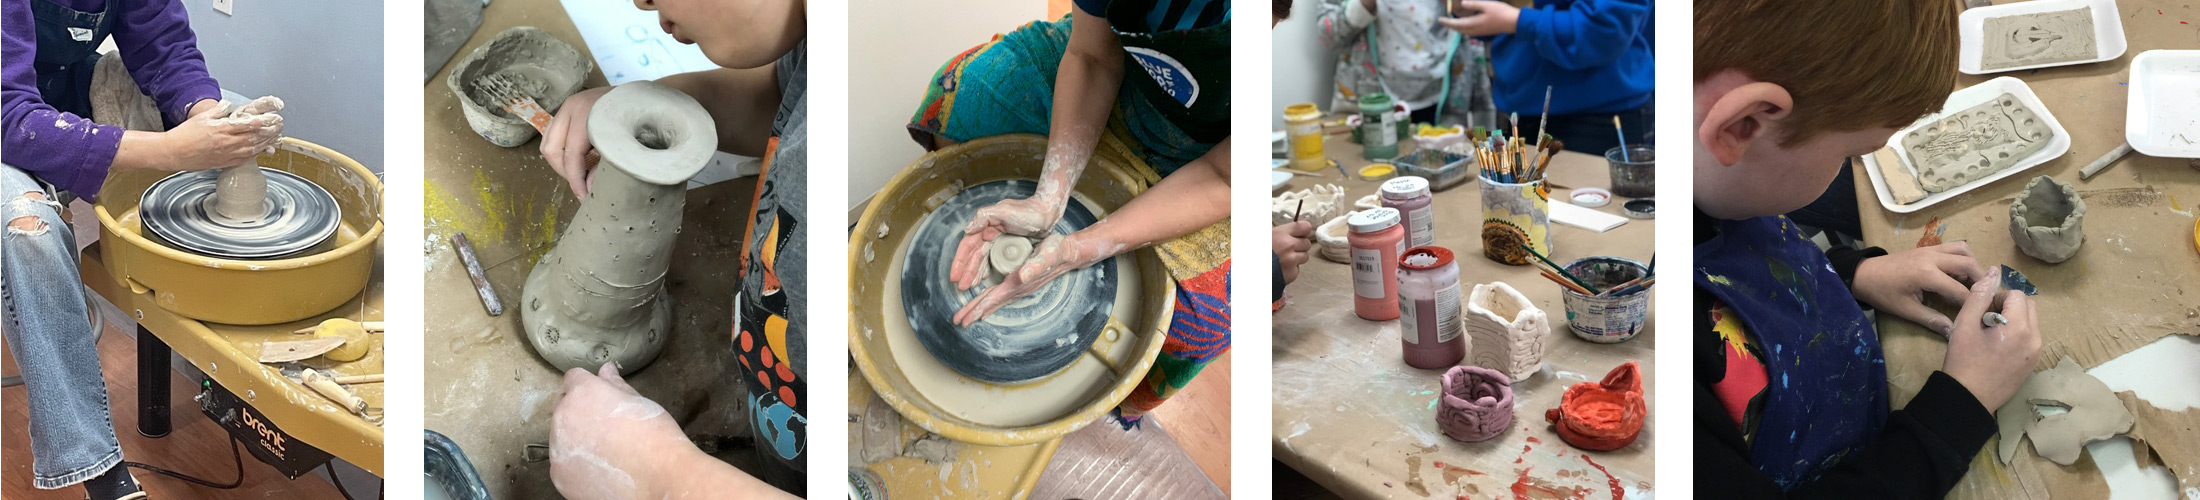 Monday Open Studio for Pottery Wheel - Clay & Canvas - Sawyer